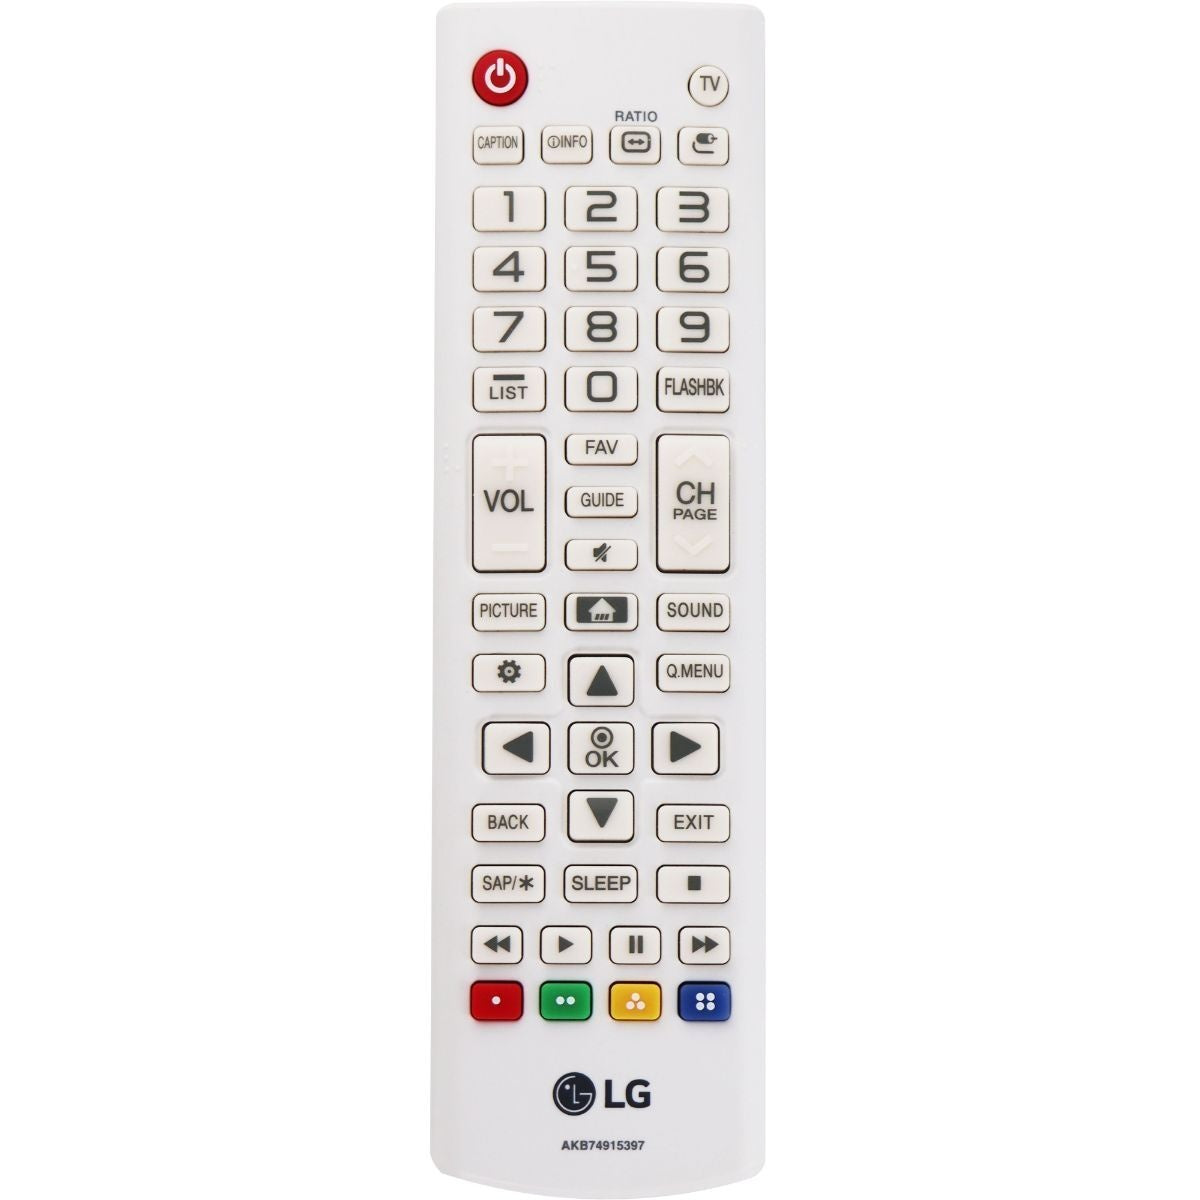 LG Remote Control (AKB74915397) for Select LG TVs - White TV, Video & Audio Accessories - Remote Controls LG    - Simple Cell Bulk Wholesale Pricing - USA Seller